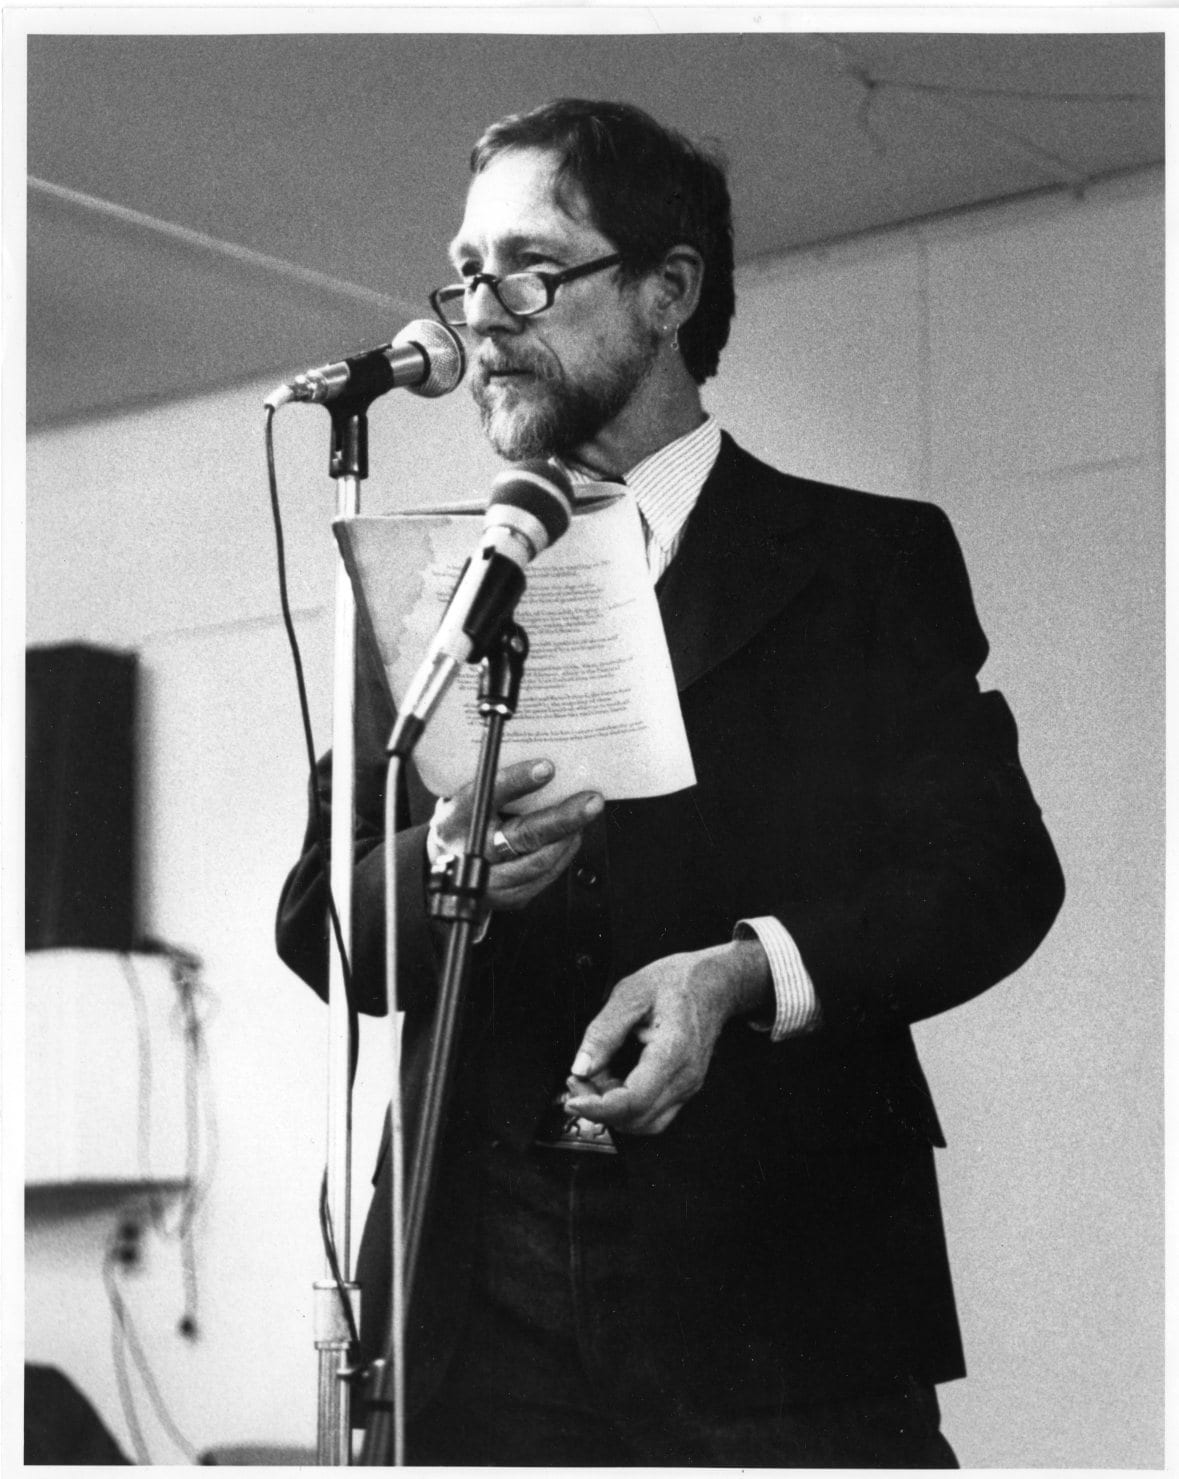 Gary Snyder, undated image from D-050 Gary Snyder Papers.